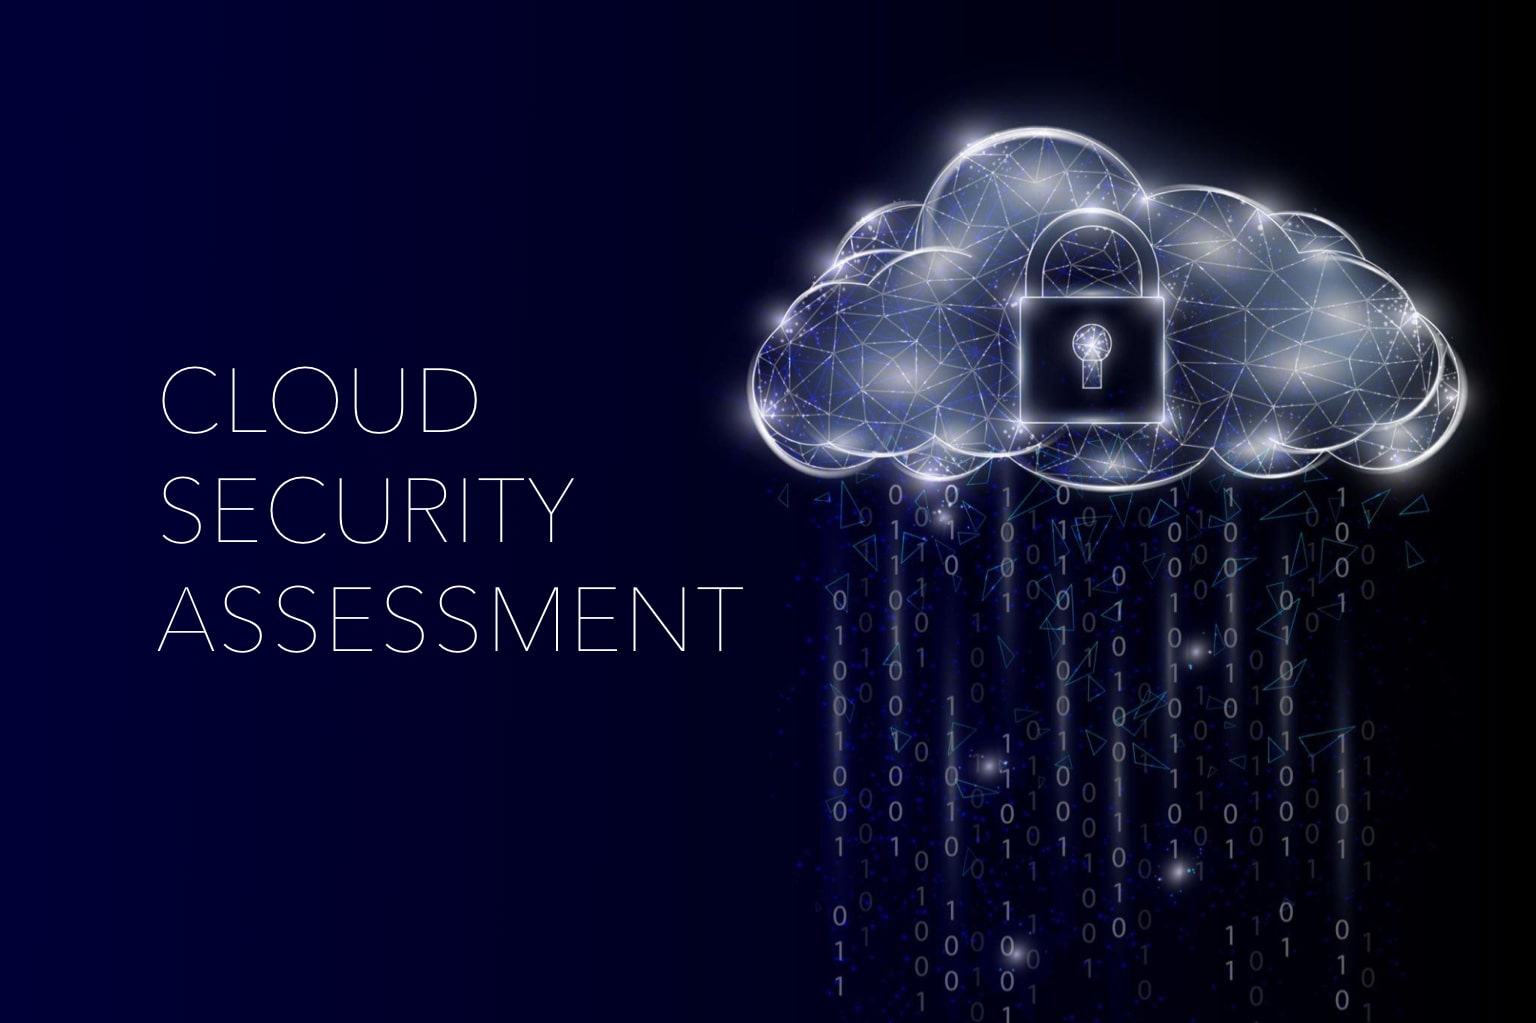 How to Conduct a Cloud Security Assessment? - 5 Steps